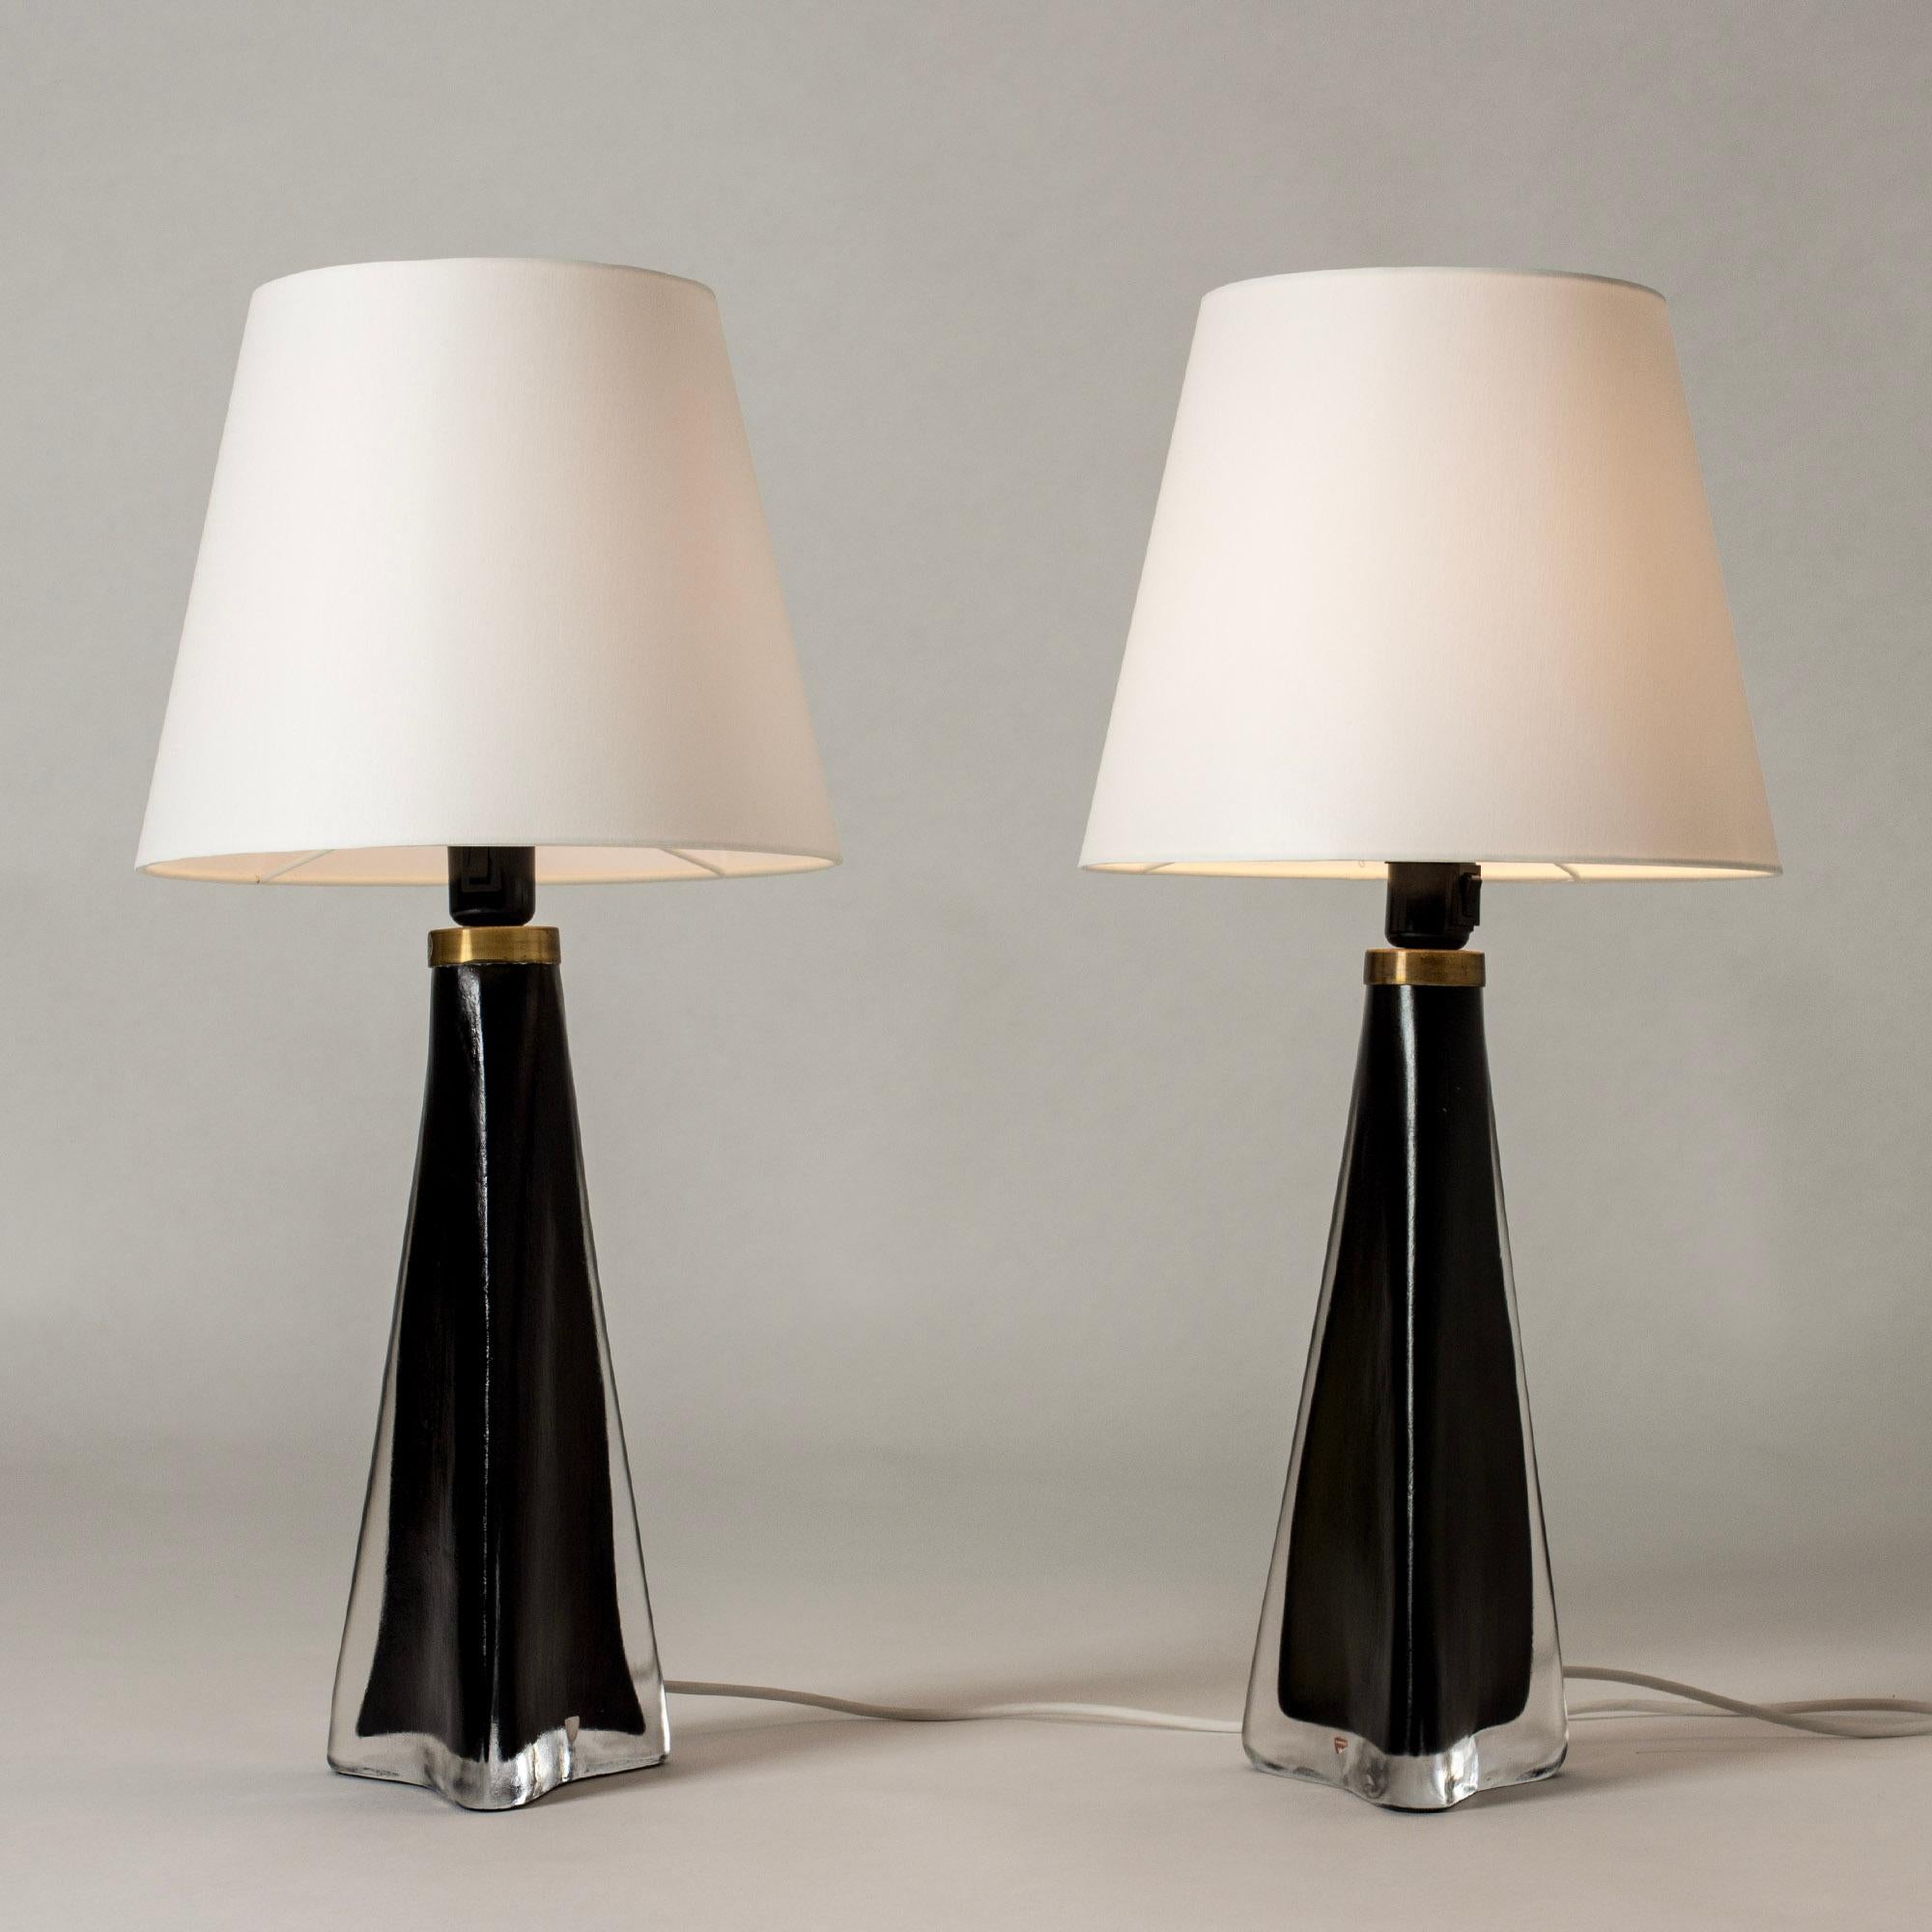 Midcentury Glass Table Lamps by Carl Fagerlund, Orrefors, Sweden, 1960s For Sale 2